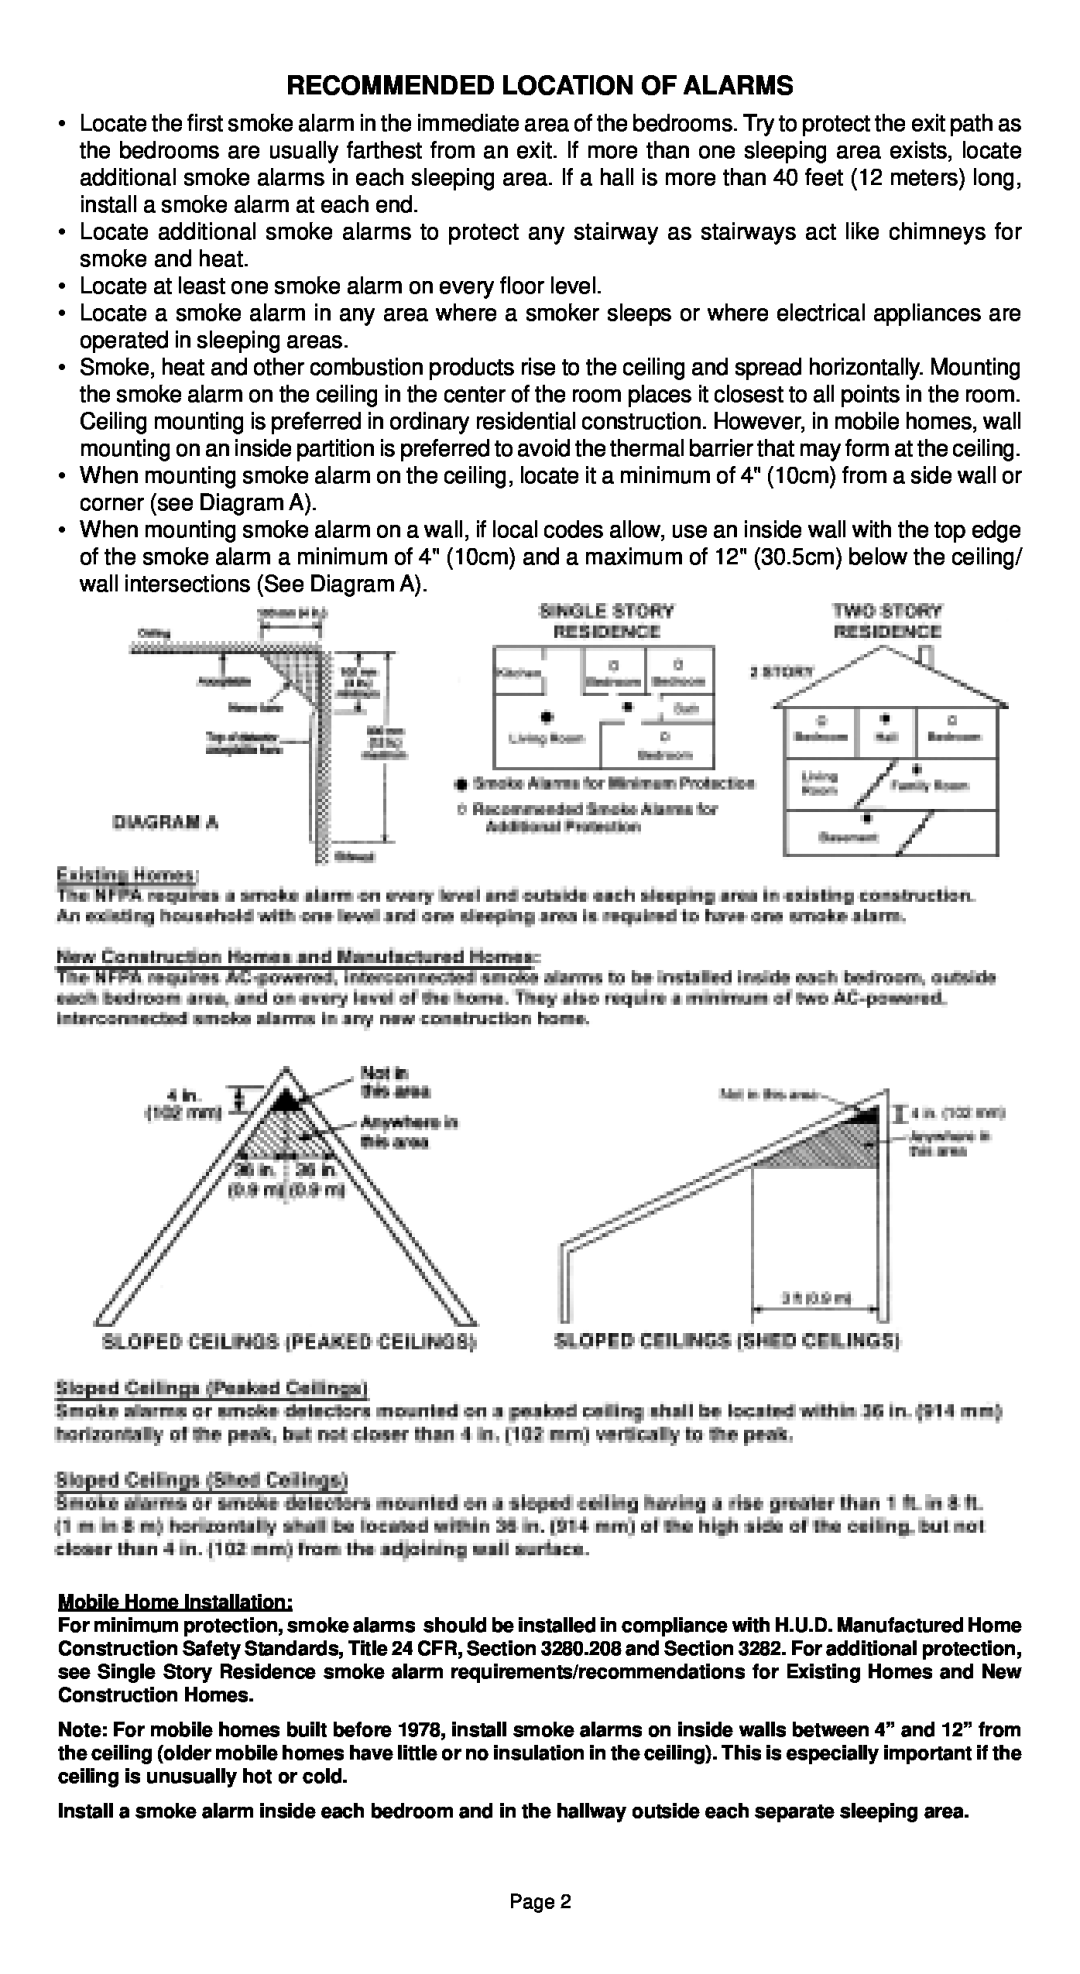 Universal SS-770/SS-771 manual Recommended Location Of Alarms 